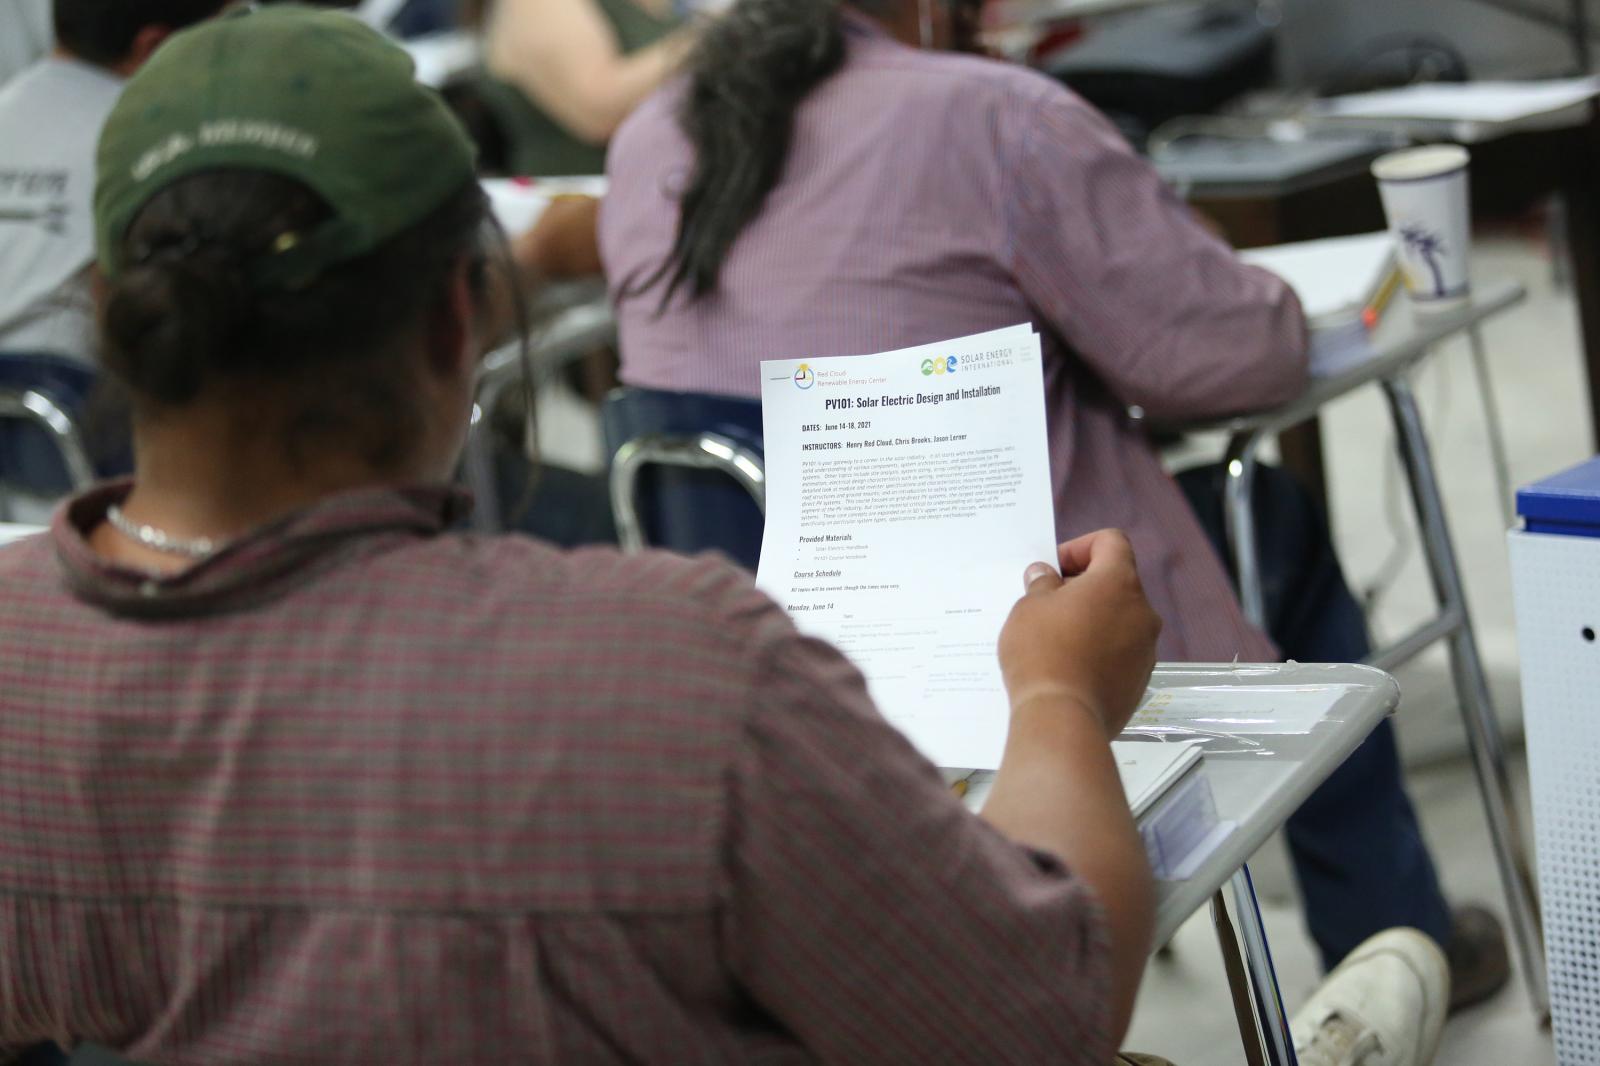 Student Gwe Gasco looks at a course handout on the Pine Ridge reservation in South Dakota, U.S., June 13, 2021. Picture taken June 13, 2021. REUTERS/Emilie Richardson